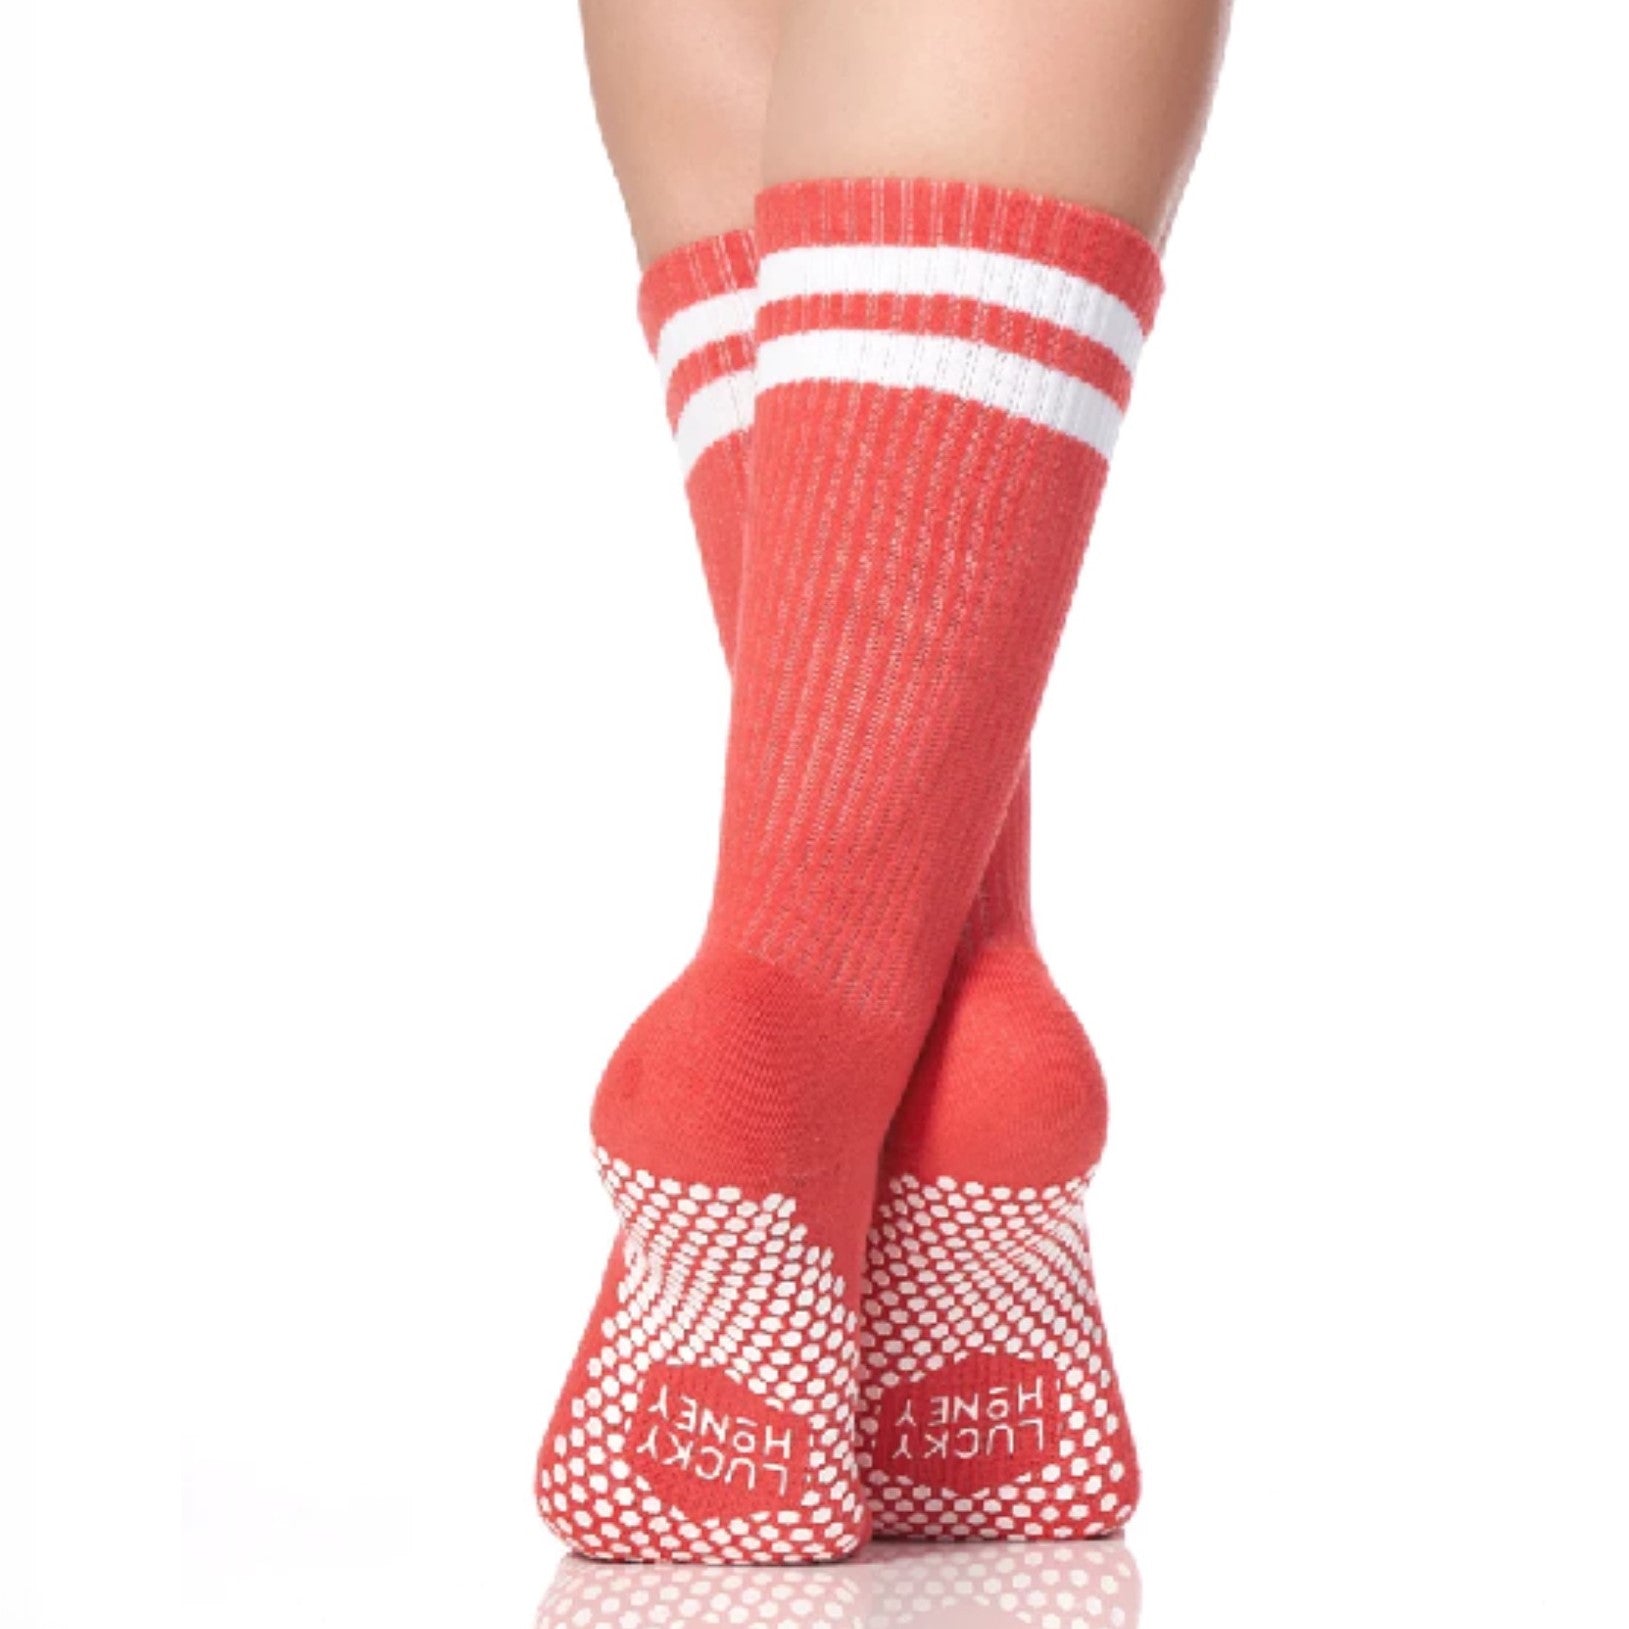 The Lucky Honey - The Dad Sock - simplyWORKOUT – SIMPLYWORKOUT